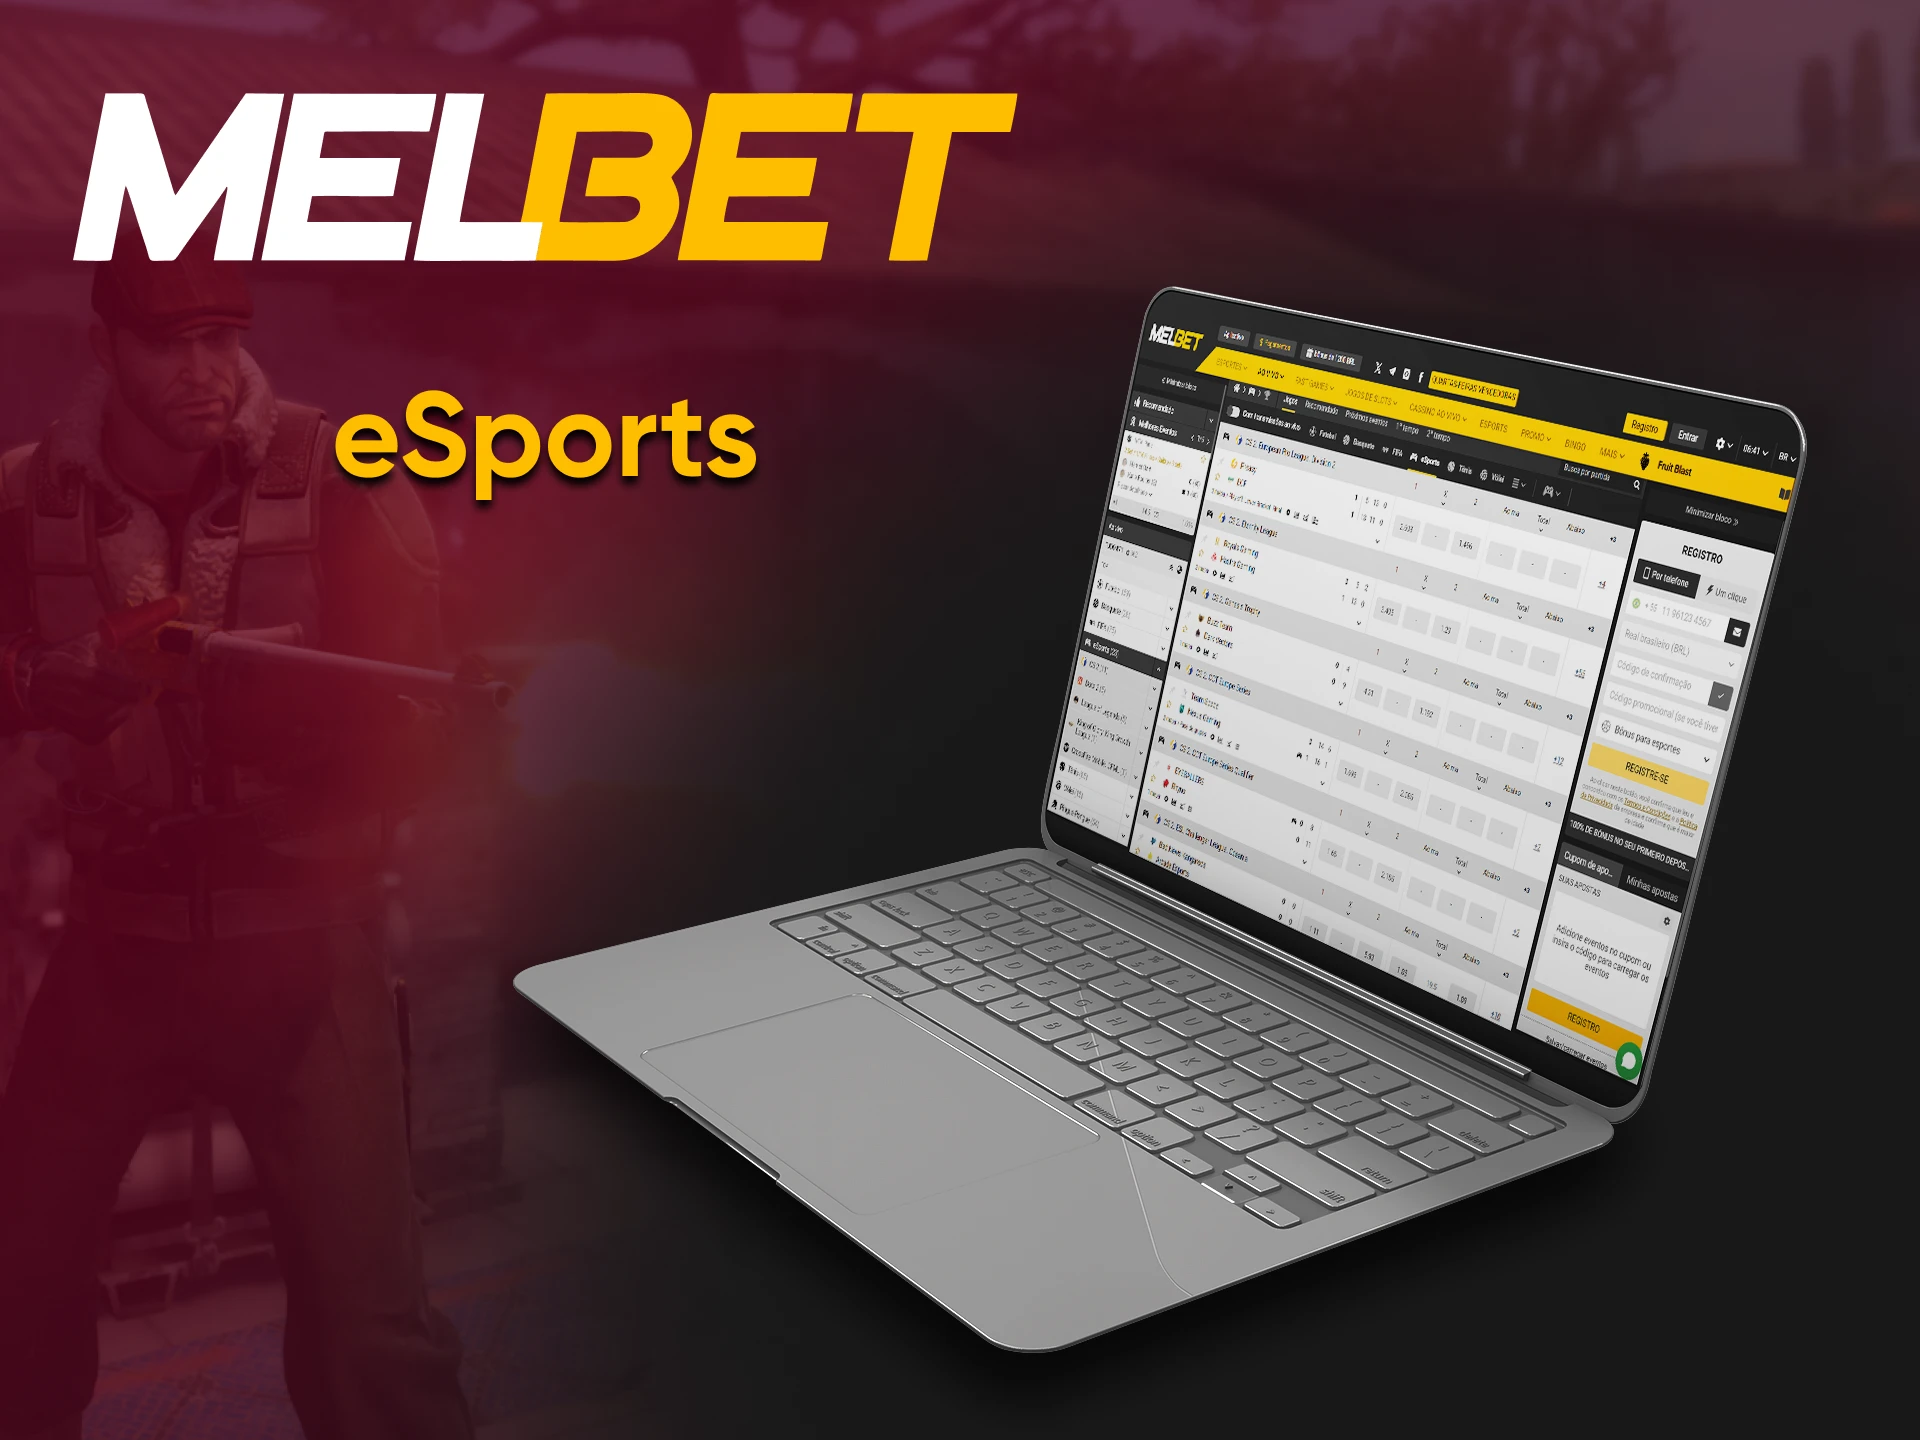 Choose Melbet eSports for sports betting.